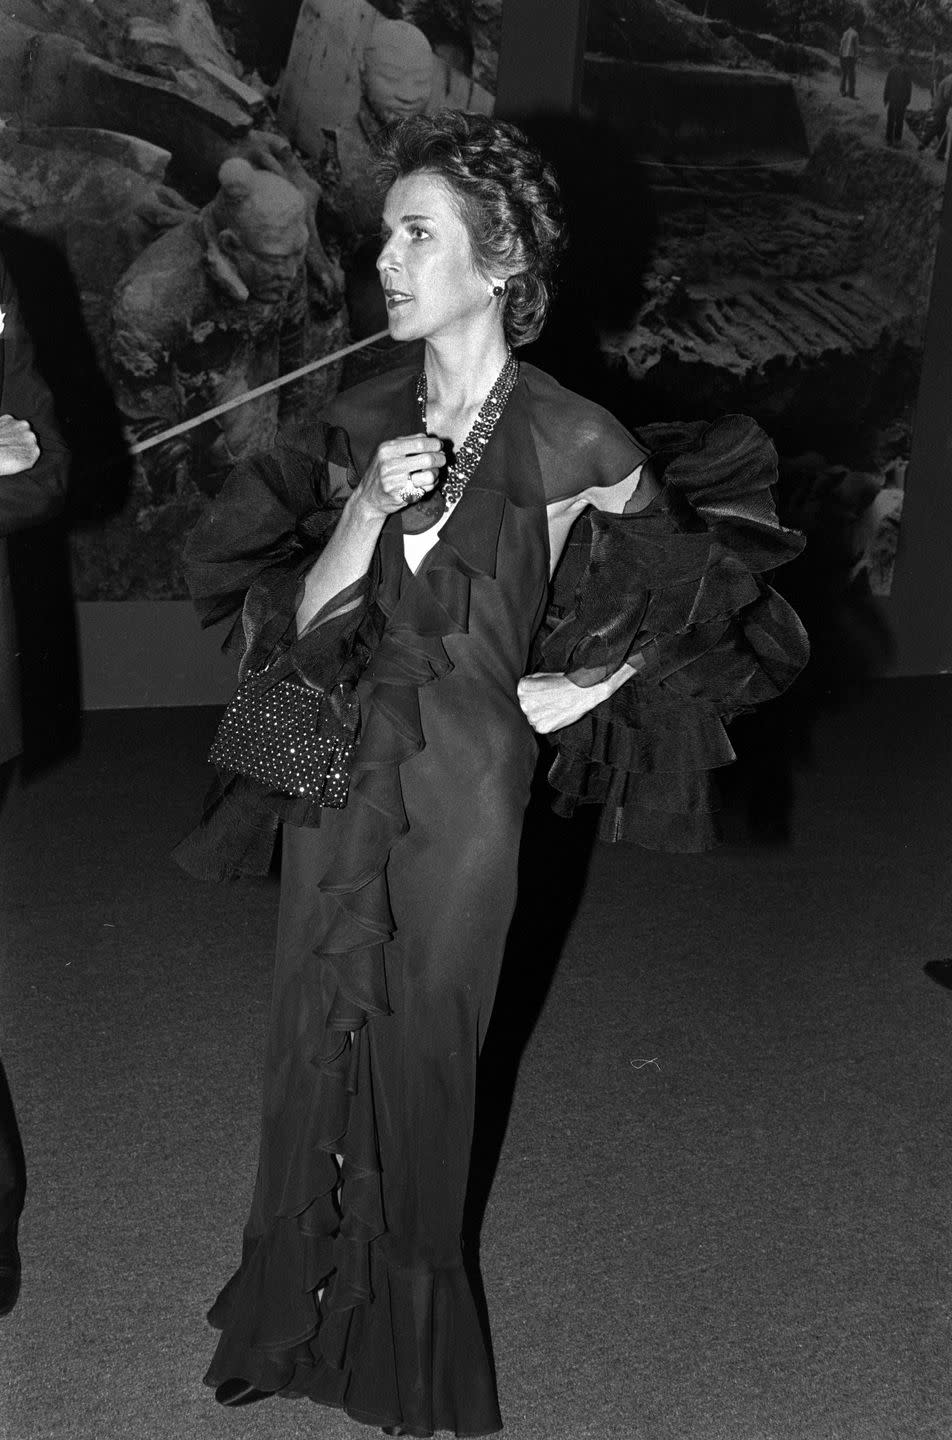 connie mellon attends a party at the metropolitan museum of art in new york city on april 14, 1980 photo by dustin pittmanwwdpenske media via getty images